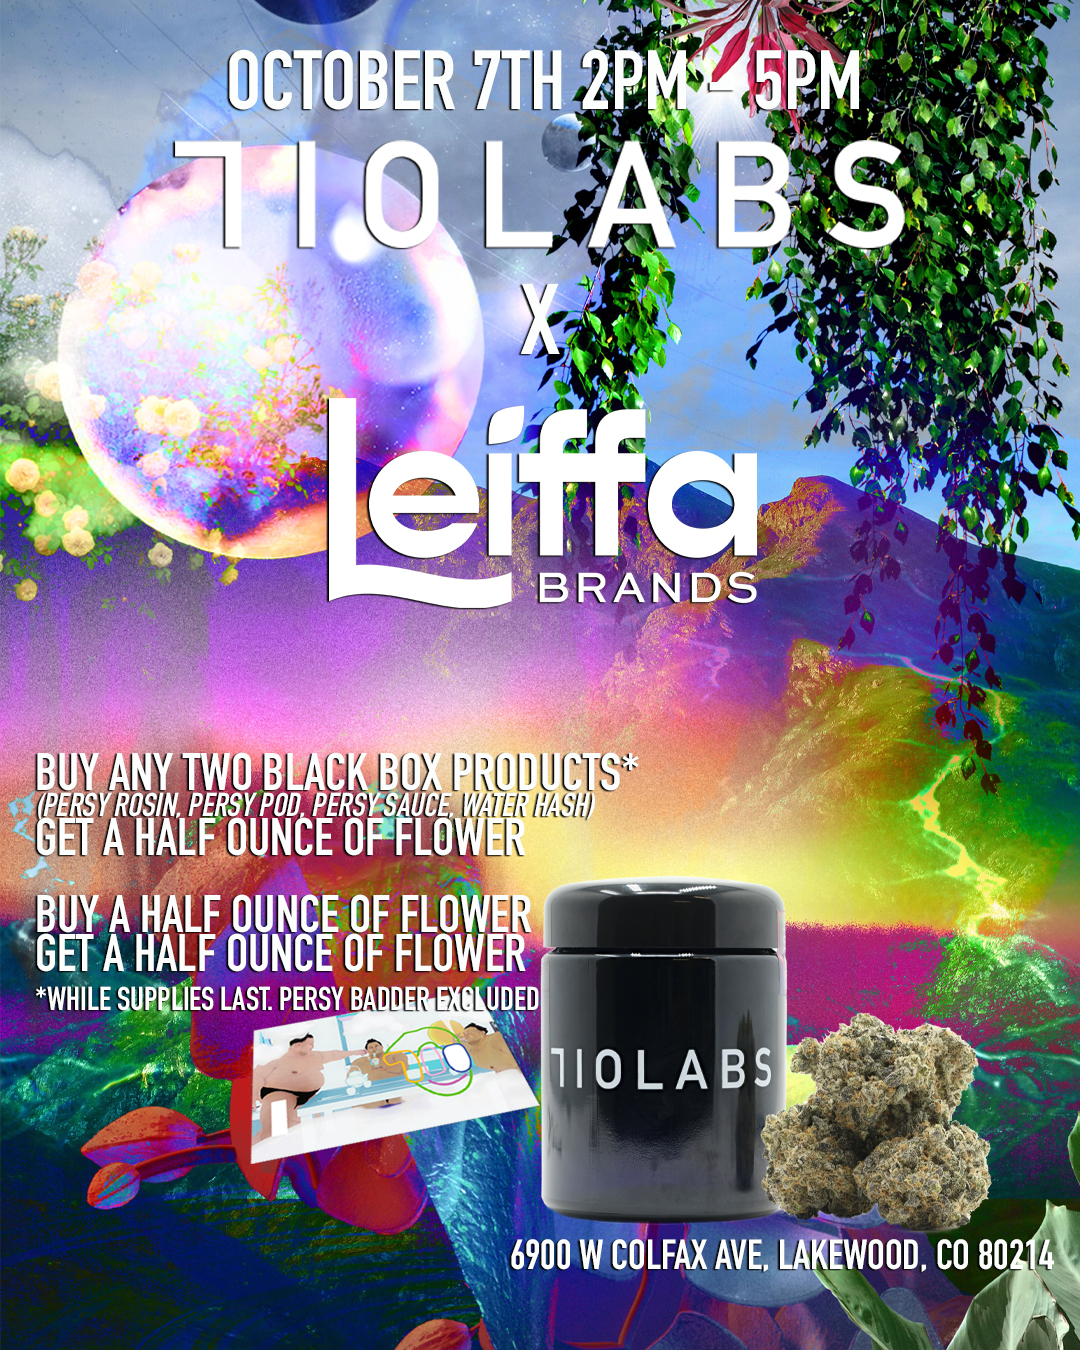 Leiffa x 710 Labs promotion imagery